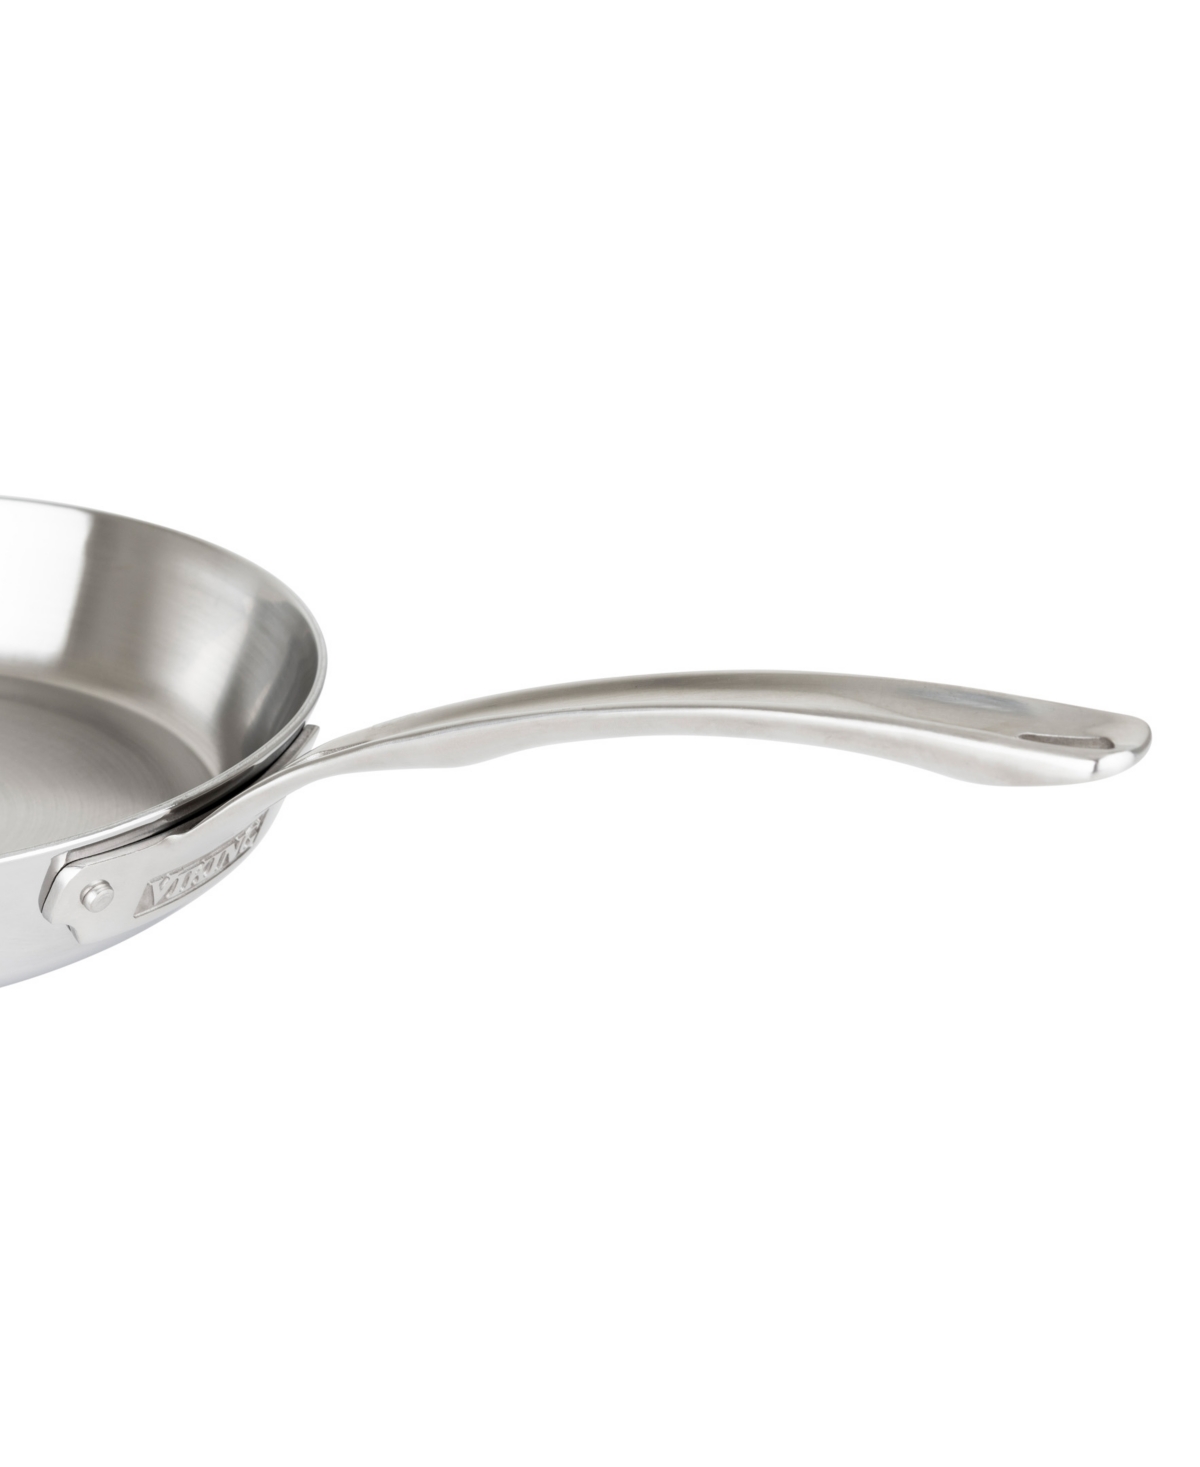 Shop Viking Contemporary 3-ply Stainless Steel 10" Fry Pan